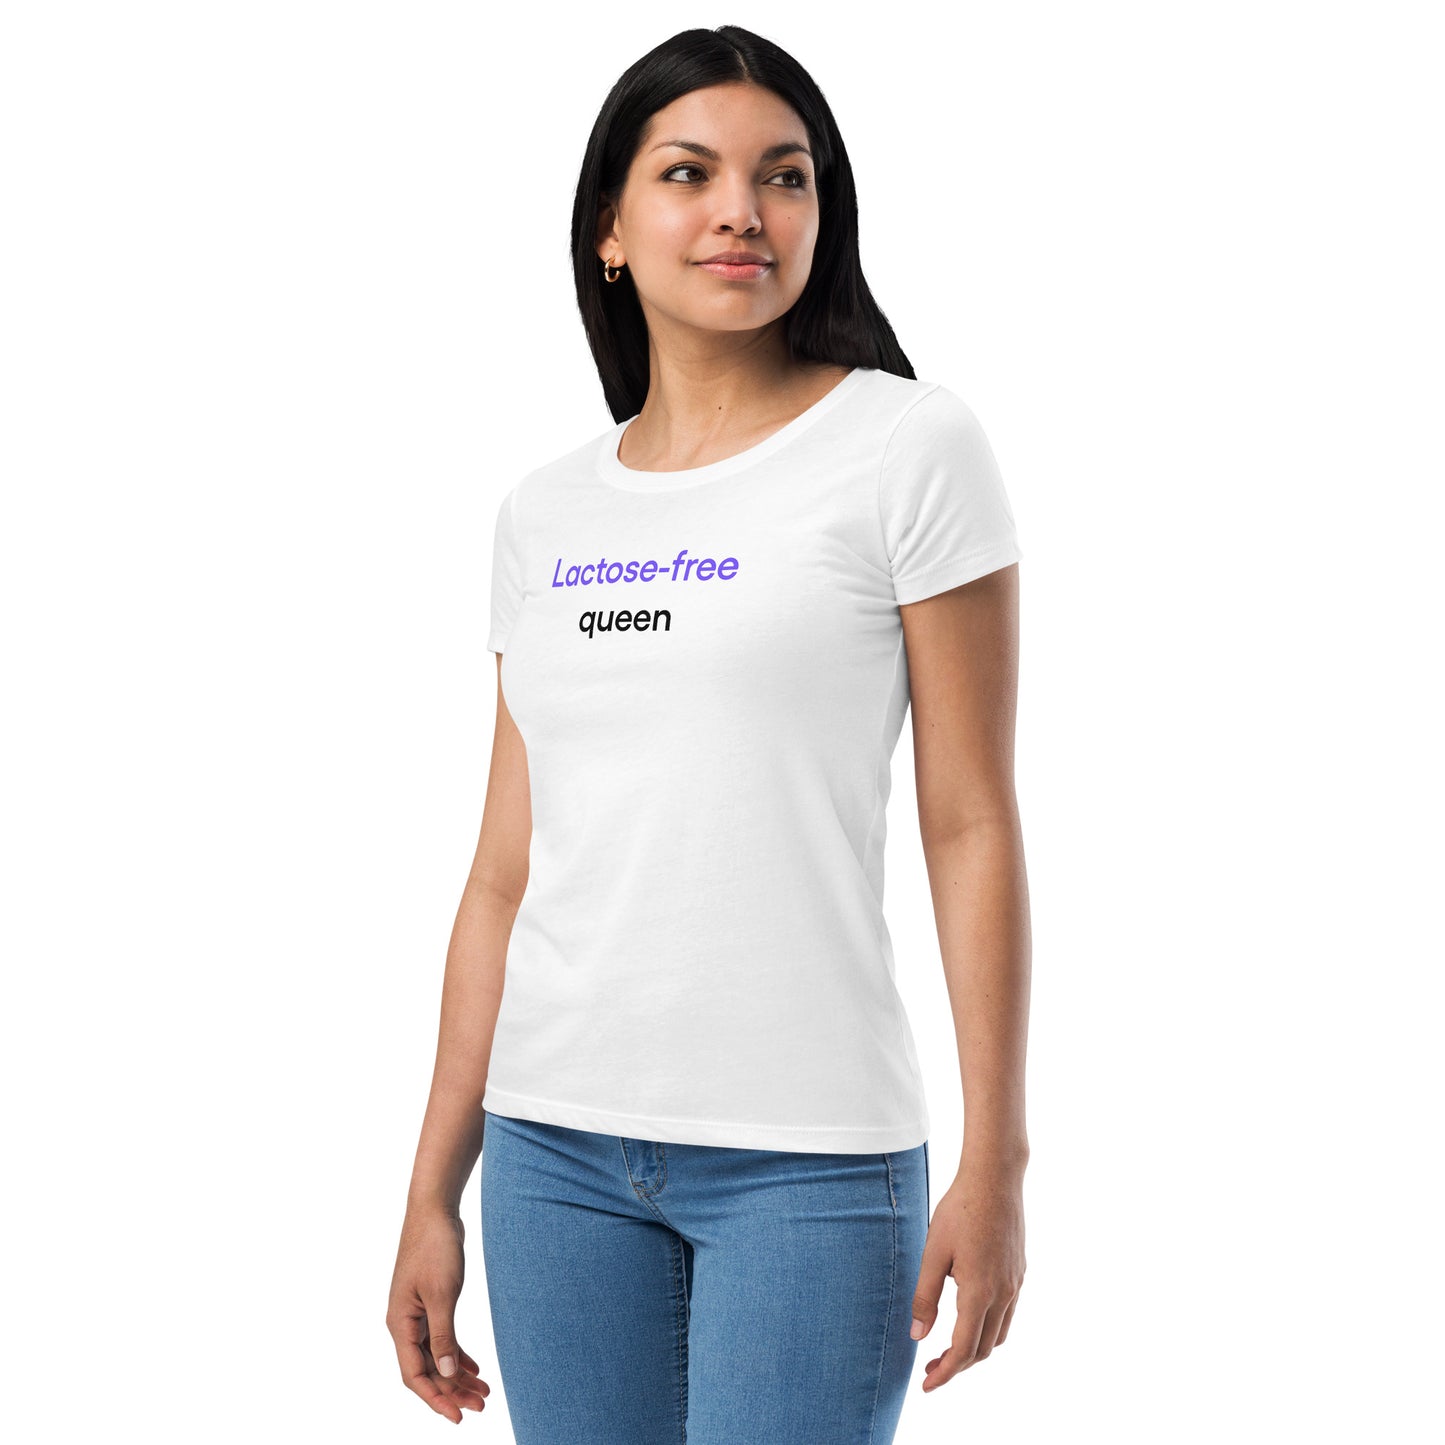 Lactose-free queen | Women’s fitted t-shirt